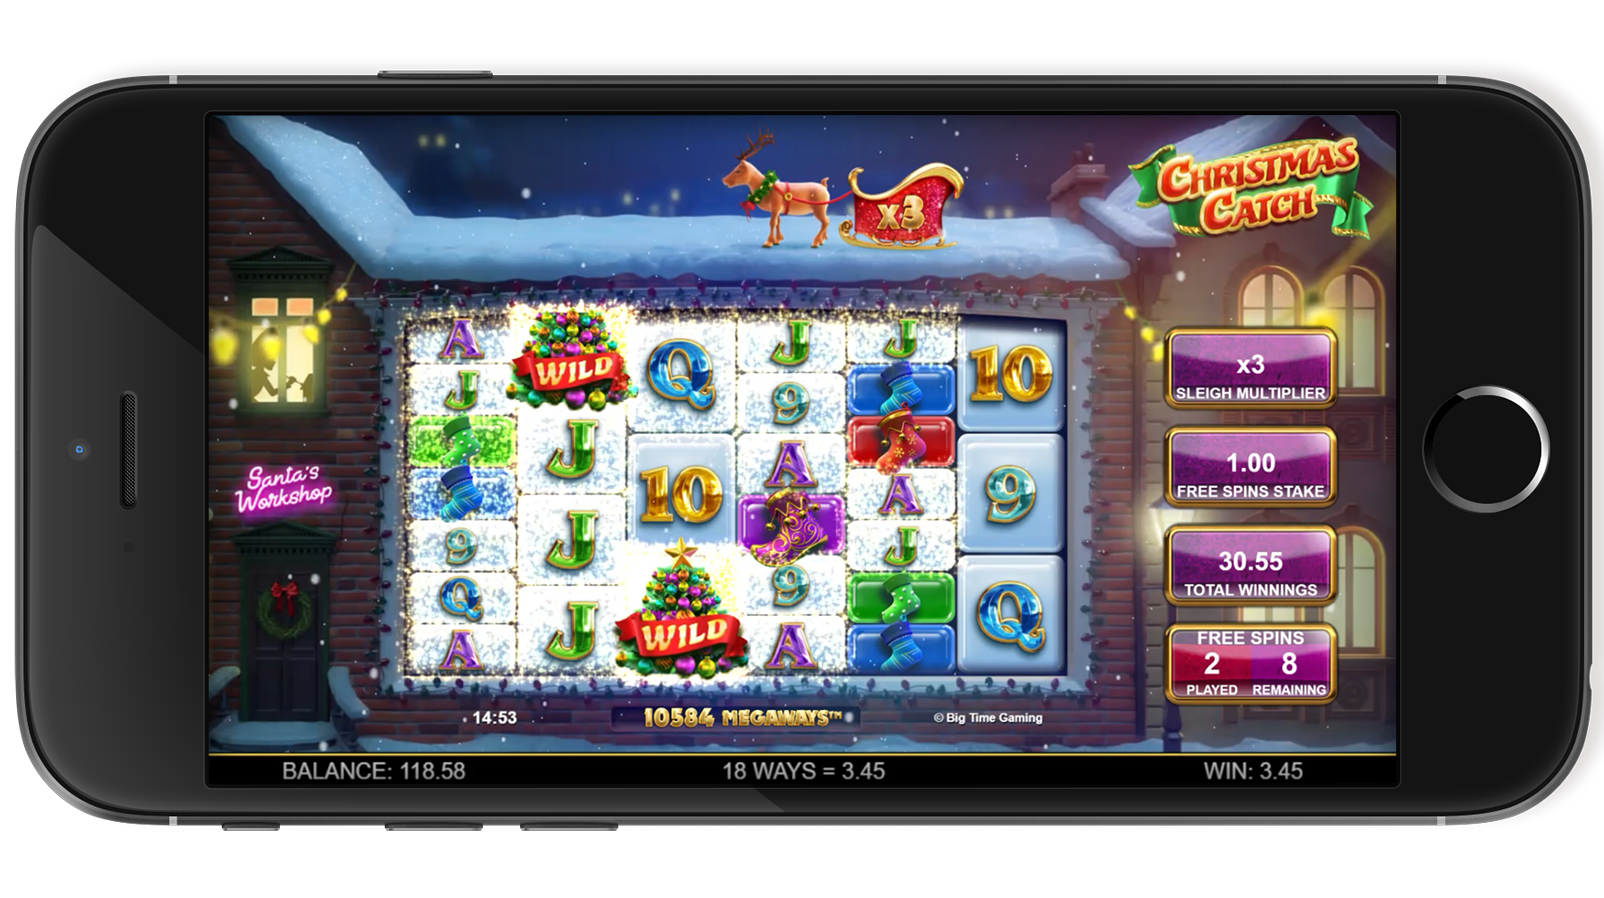 ChristmasCatch_FreeSpins_4_mobile.png